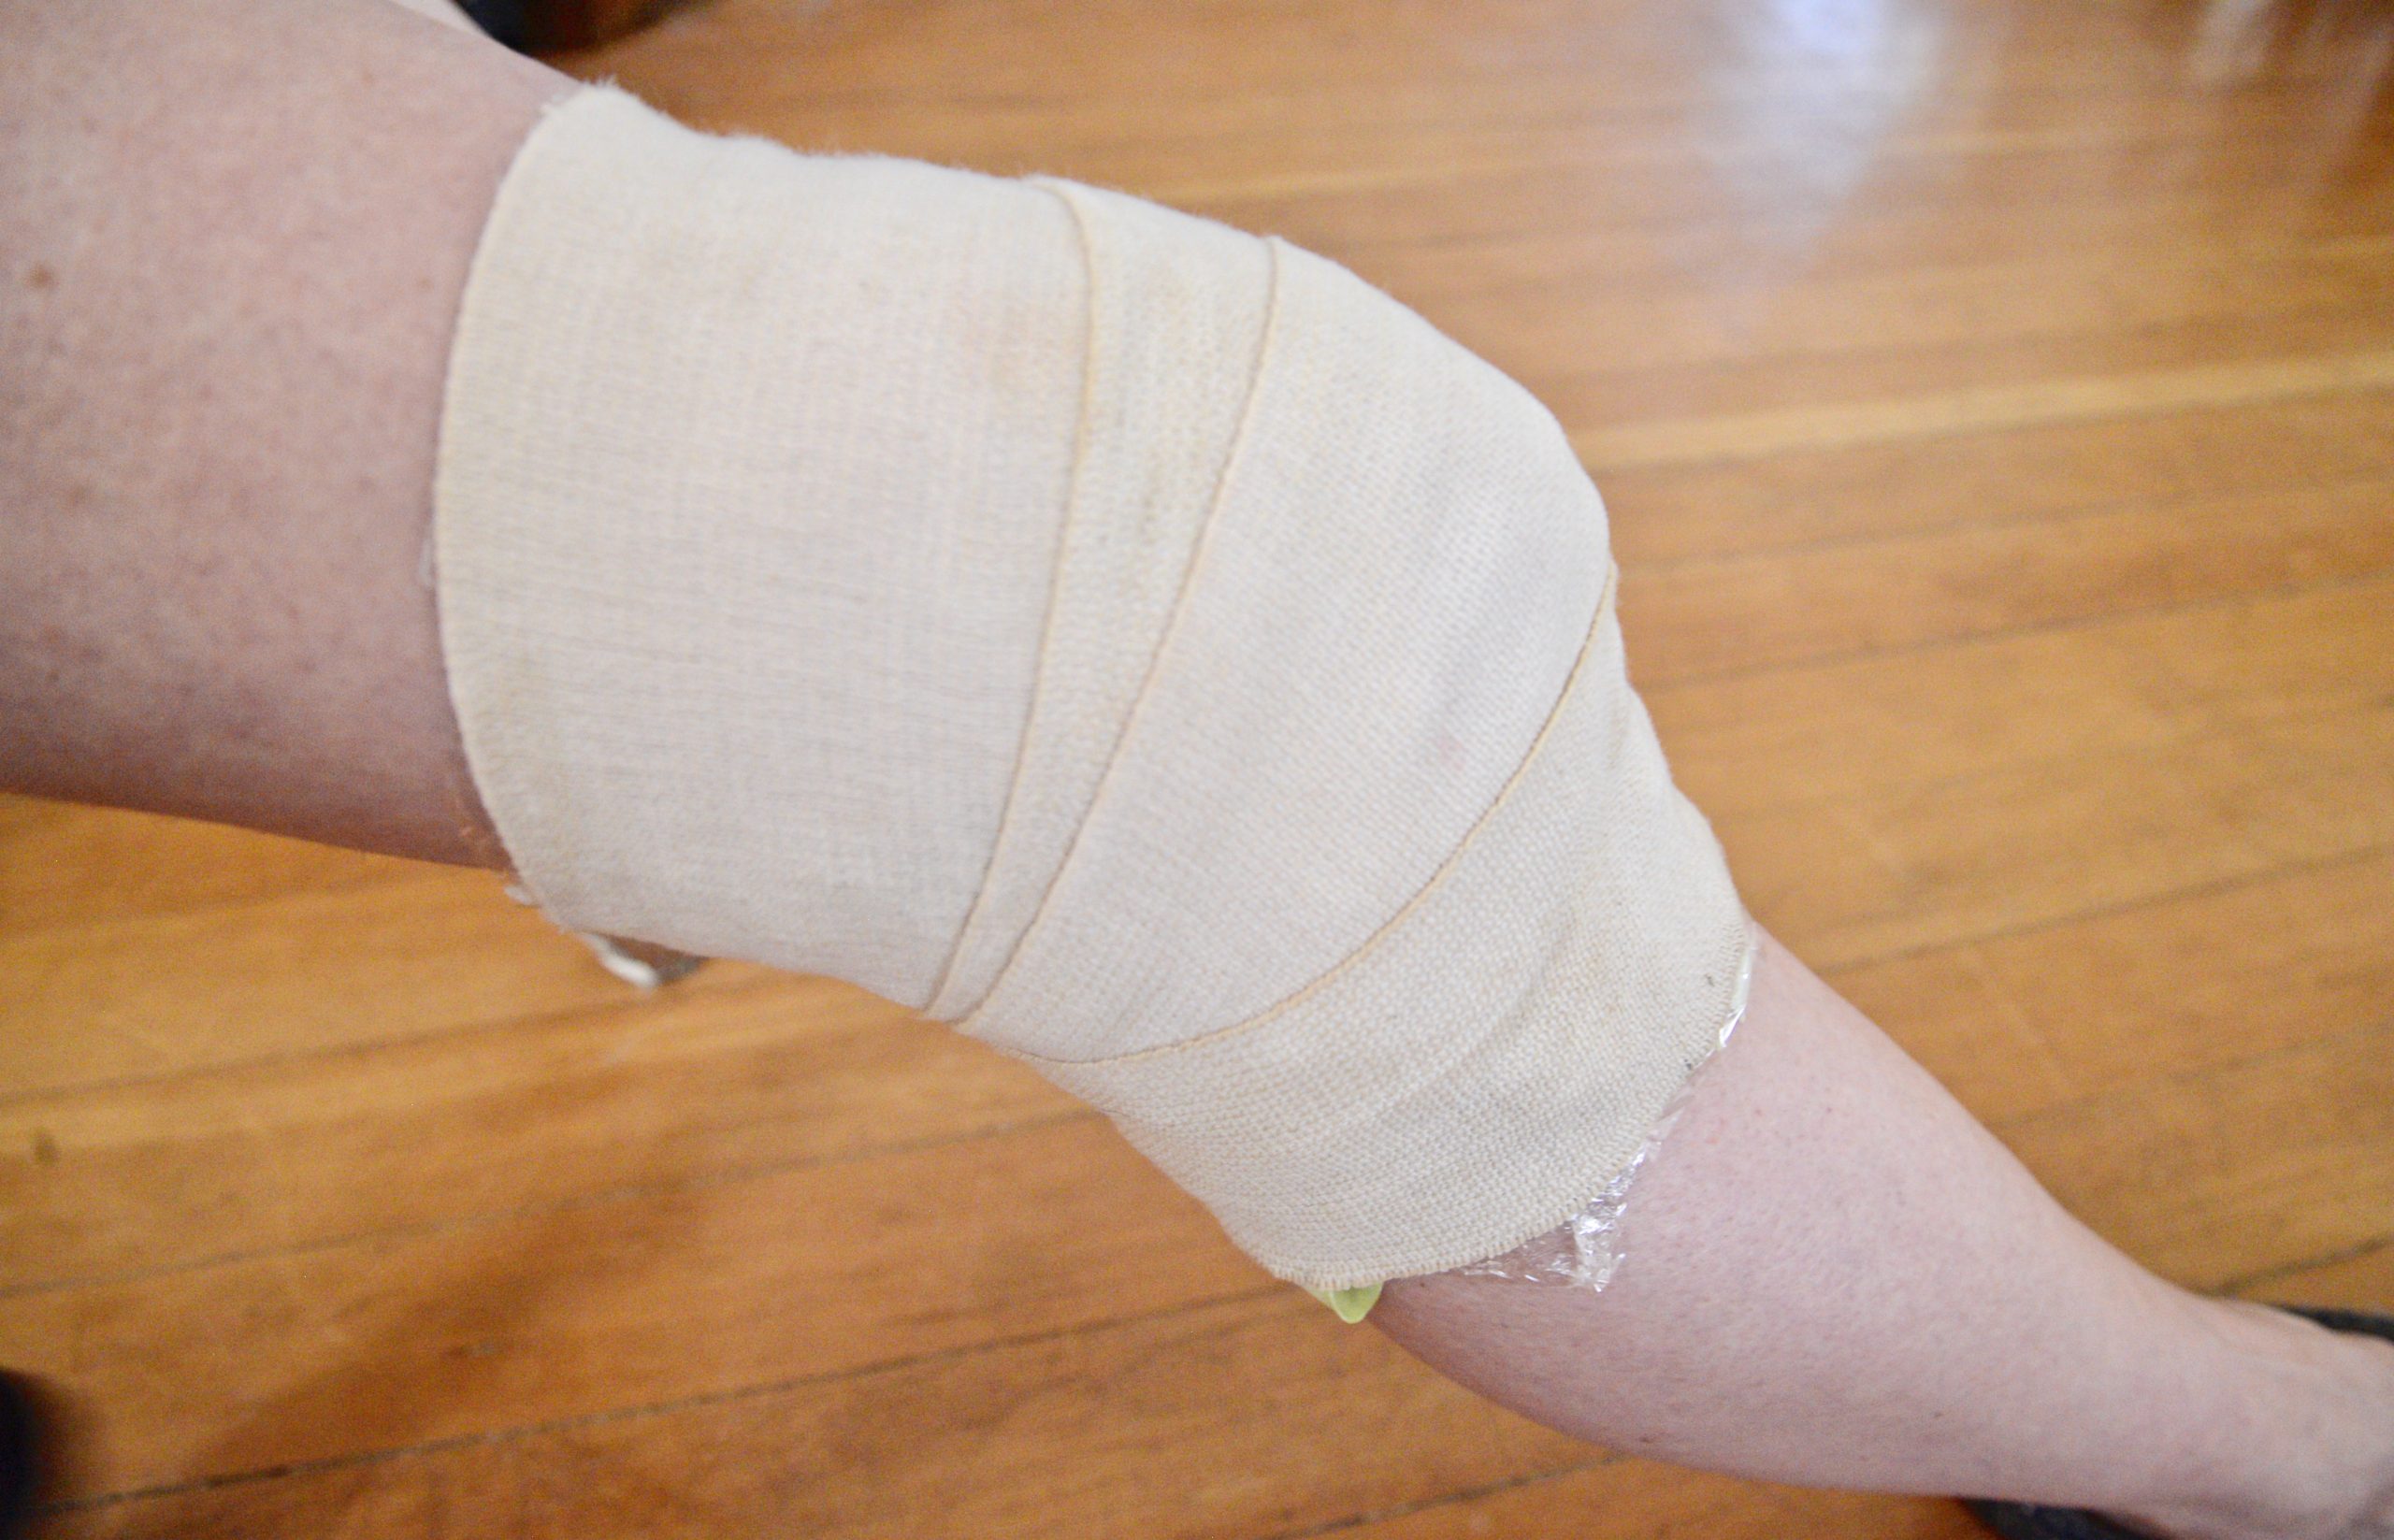 finished cabbage leaf wrap for joint pain, swelling